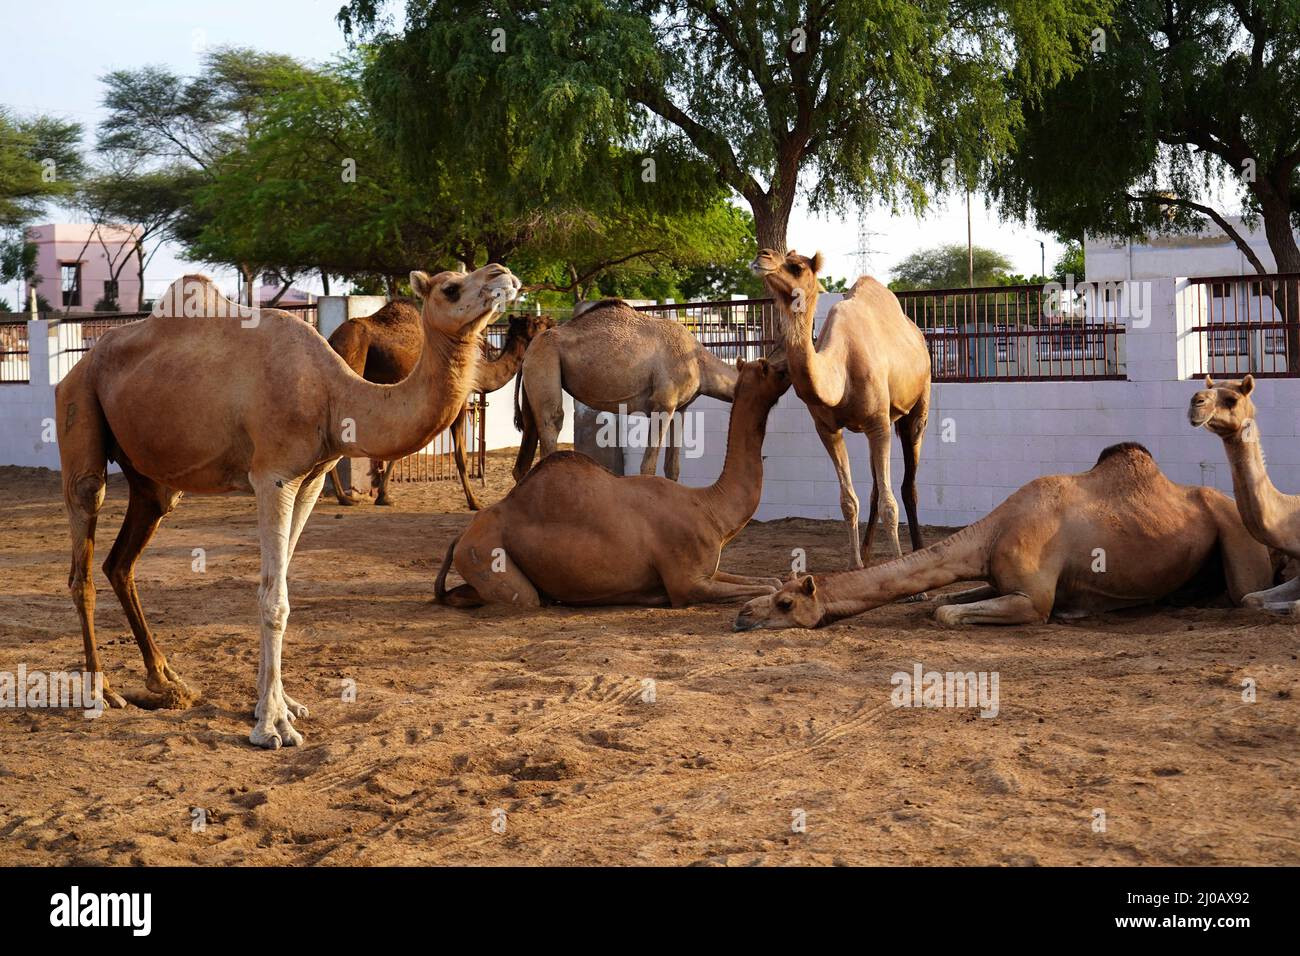 A Herd of camels at a camel research farm in Bikaner in India's western state of Rajasthan on 09 September 2021. Once dubbed the 'ships of the desert' and indispensable to life in India's arid west, camel numbers have steadily declined as they have been usurped by technological upheaval. Photo by ABACAPRESS.COM Stock Photo